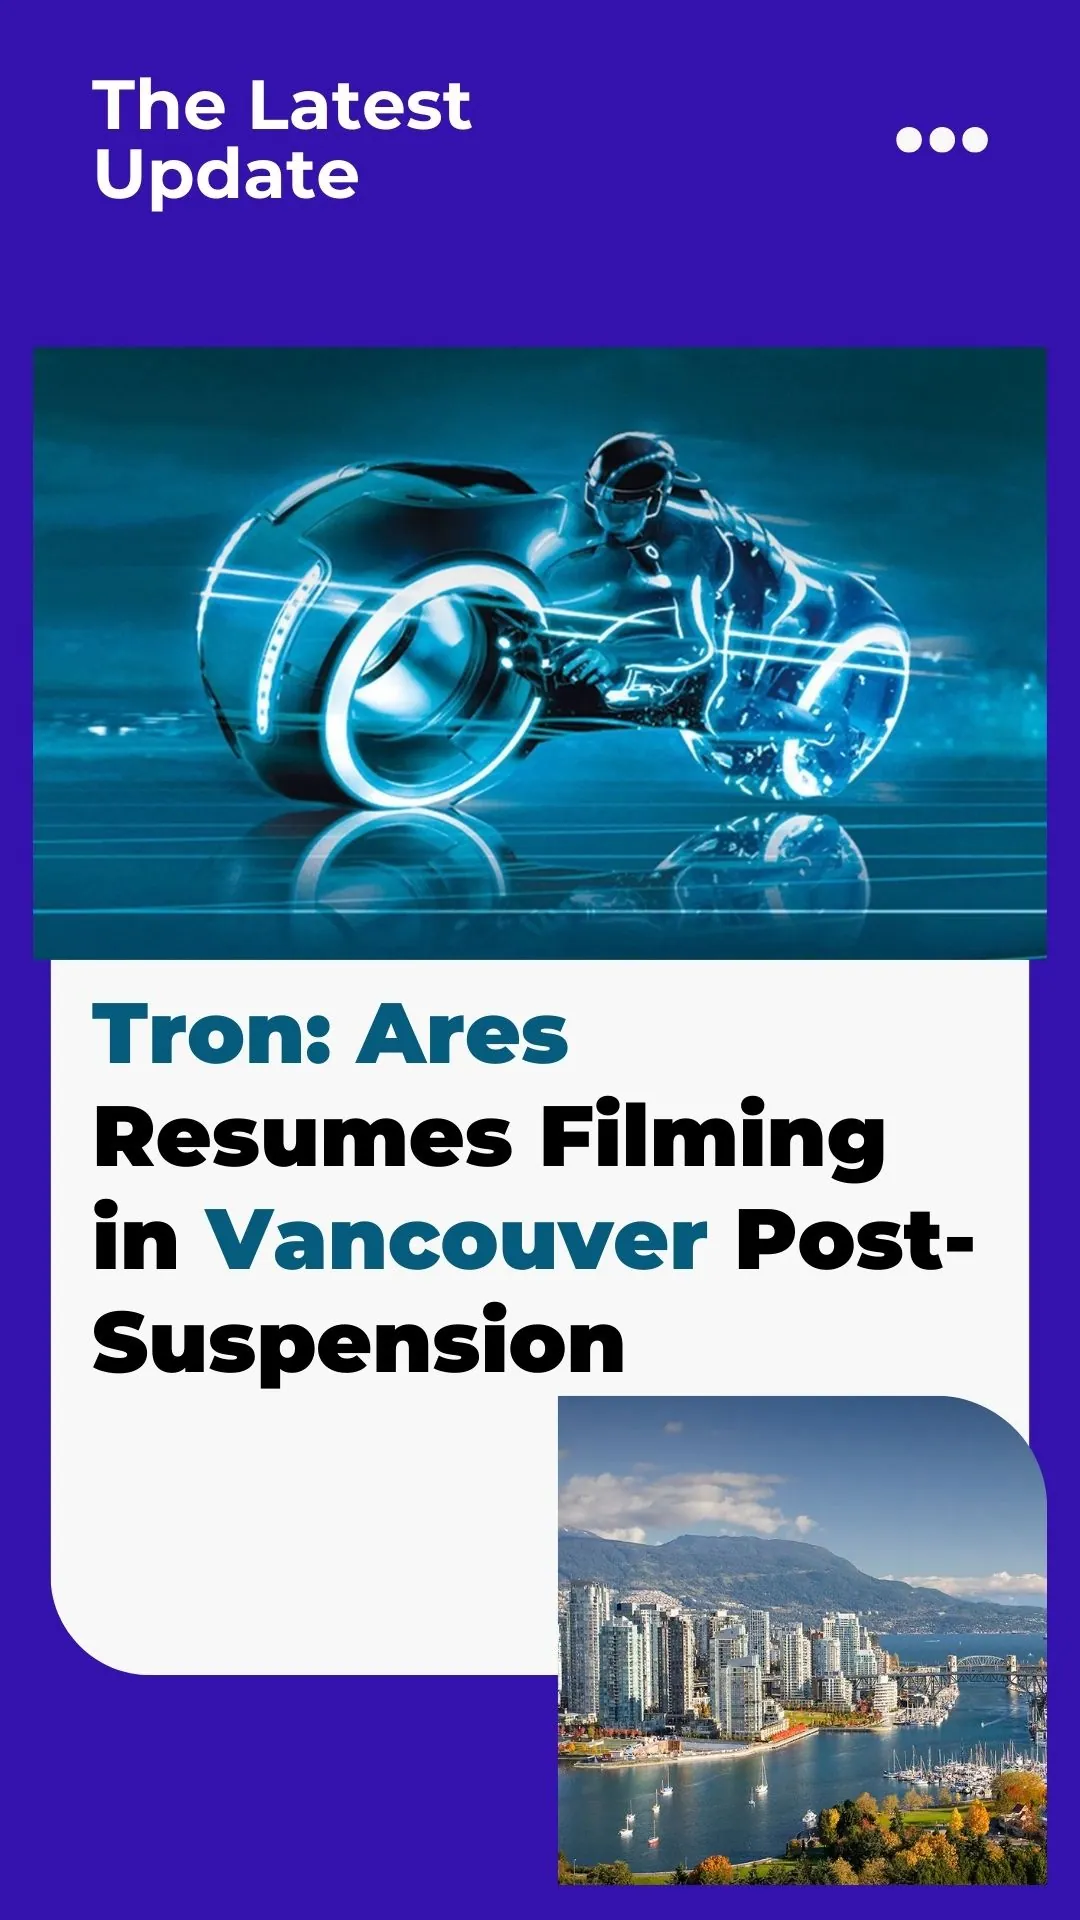 Tron: Ares Resumes Filming in Vancouver Post-Suspension: Jared Leto Leads Cast with Evan Peters, Greta Lee, and More